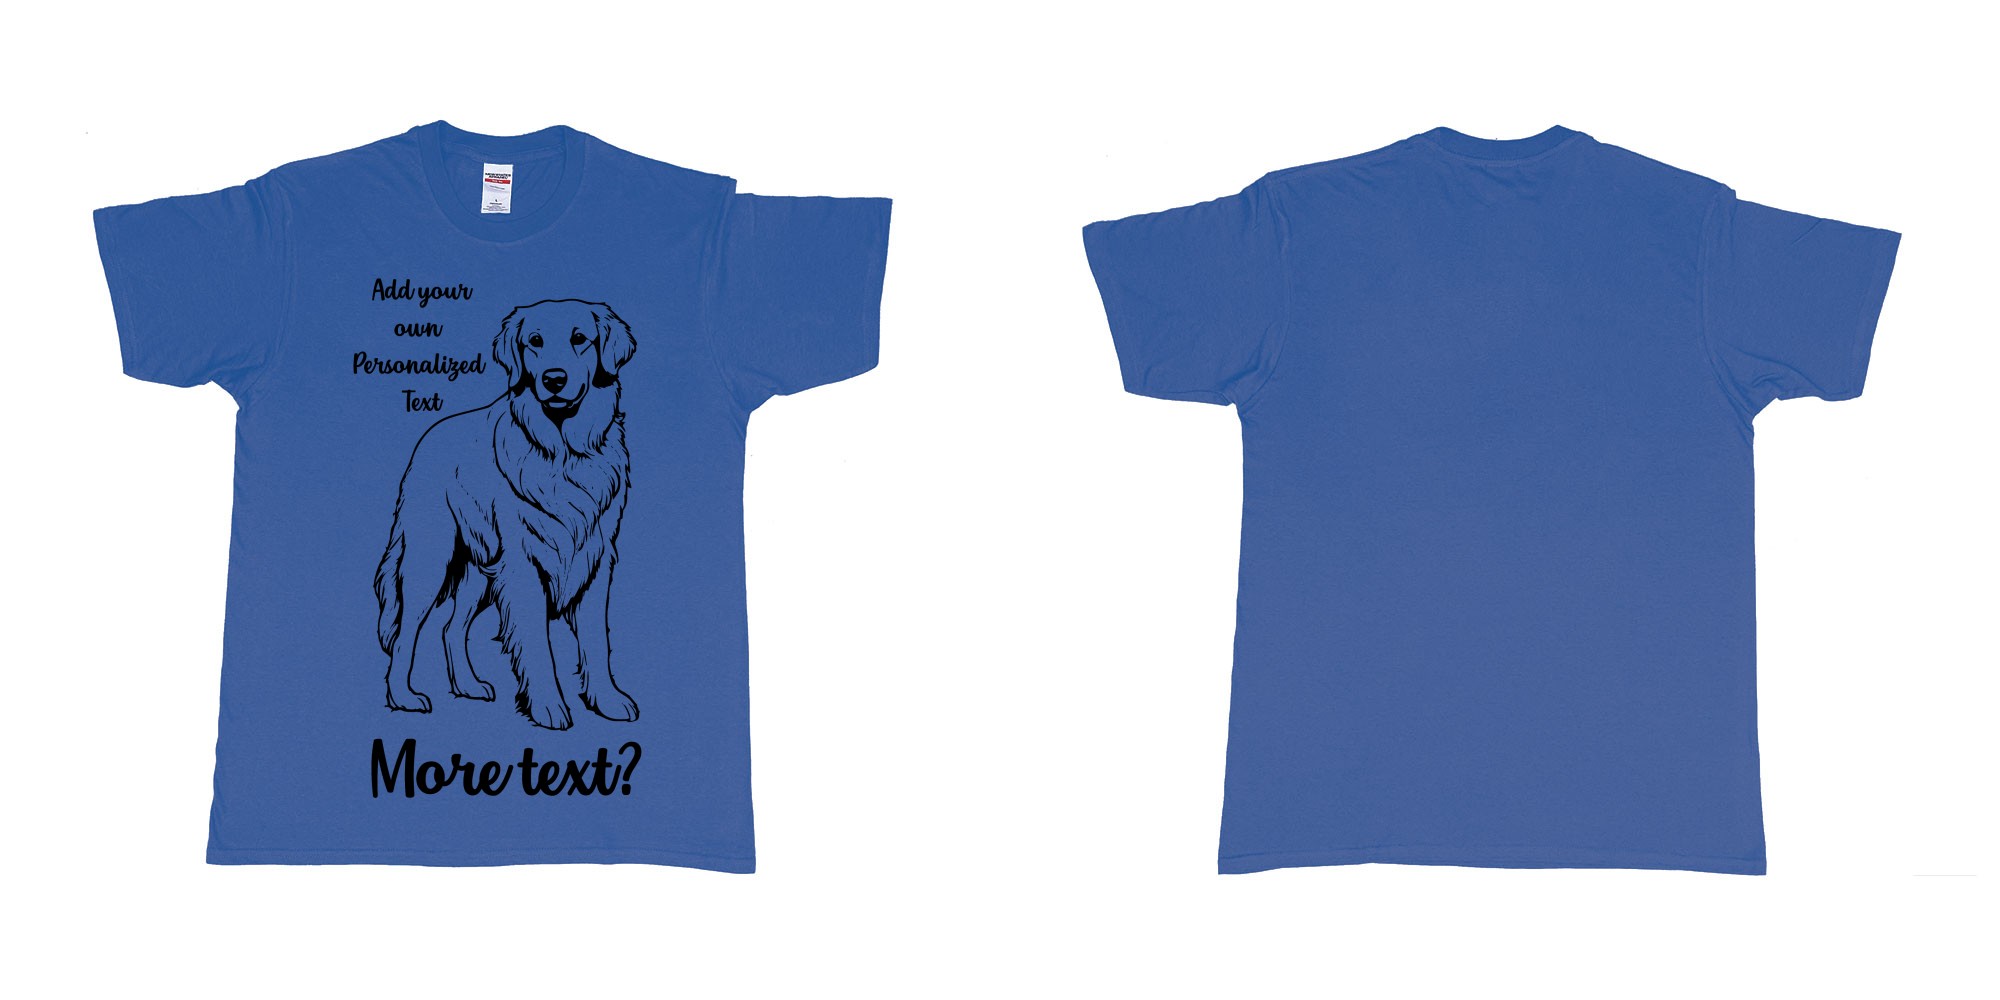 Custom tshirt design golden retriever dog breed personalized text in fabric color royal-blue choice your own text made in Bali by The Pirate Way